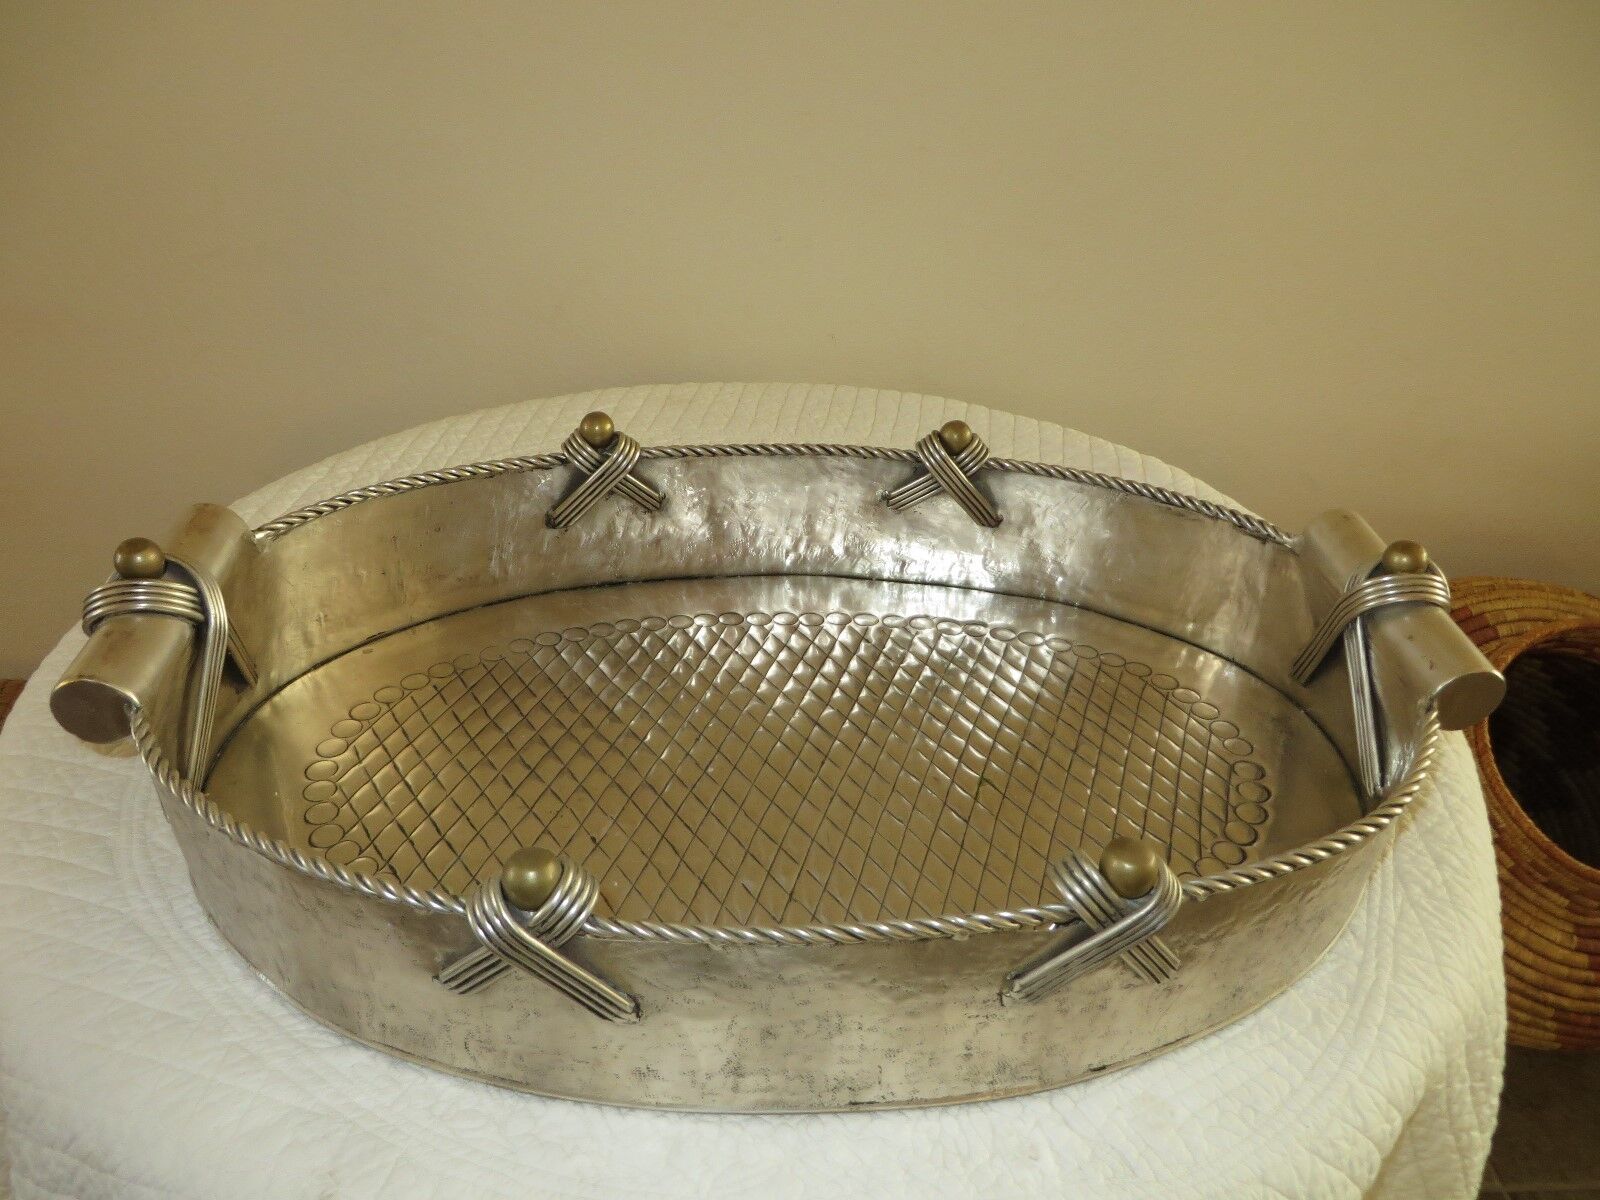 RARE SERVER STAINLESS STEEL & BRASS TRAY EX LARGE OVAL TRAY 26 X 17\